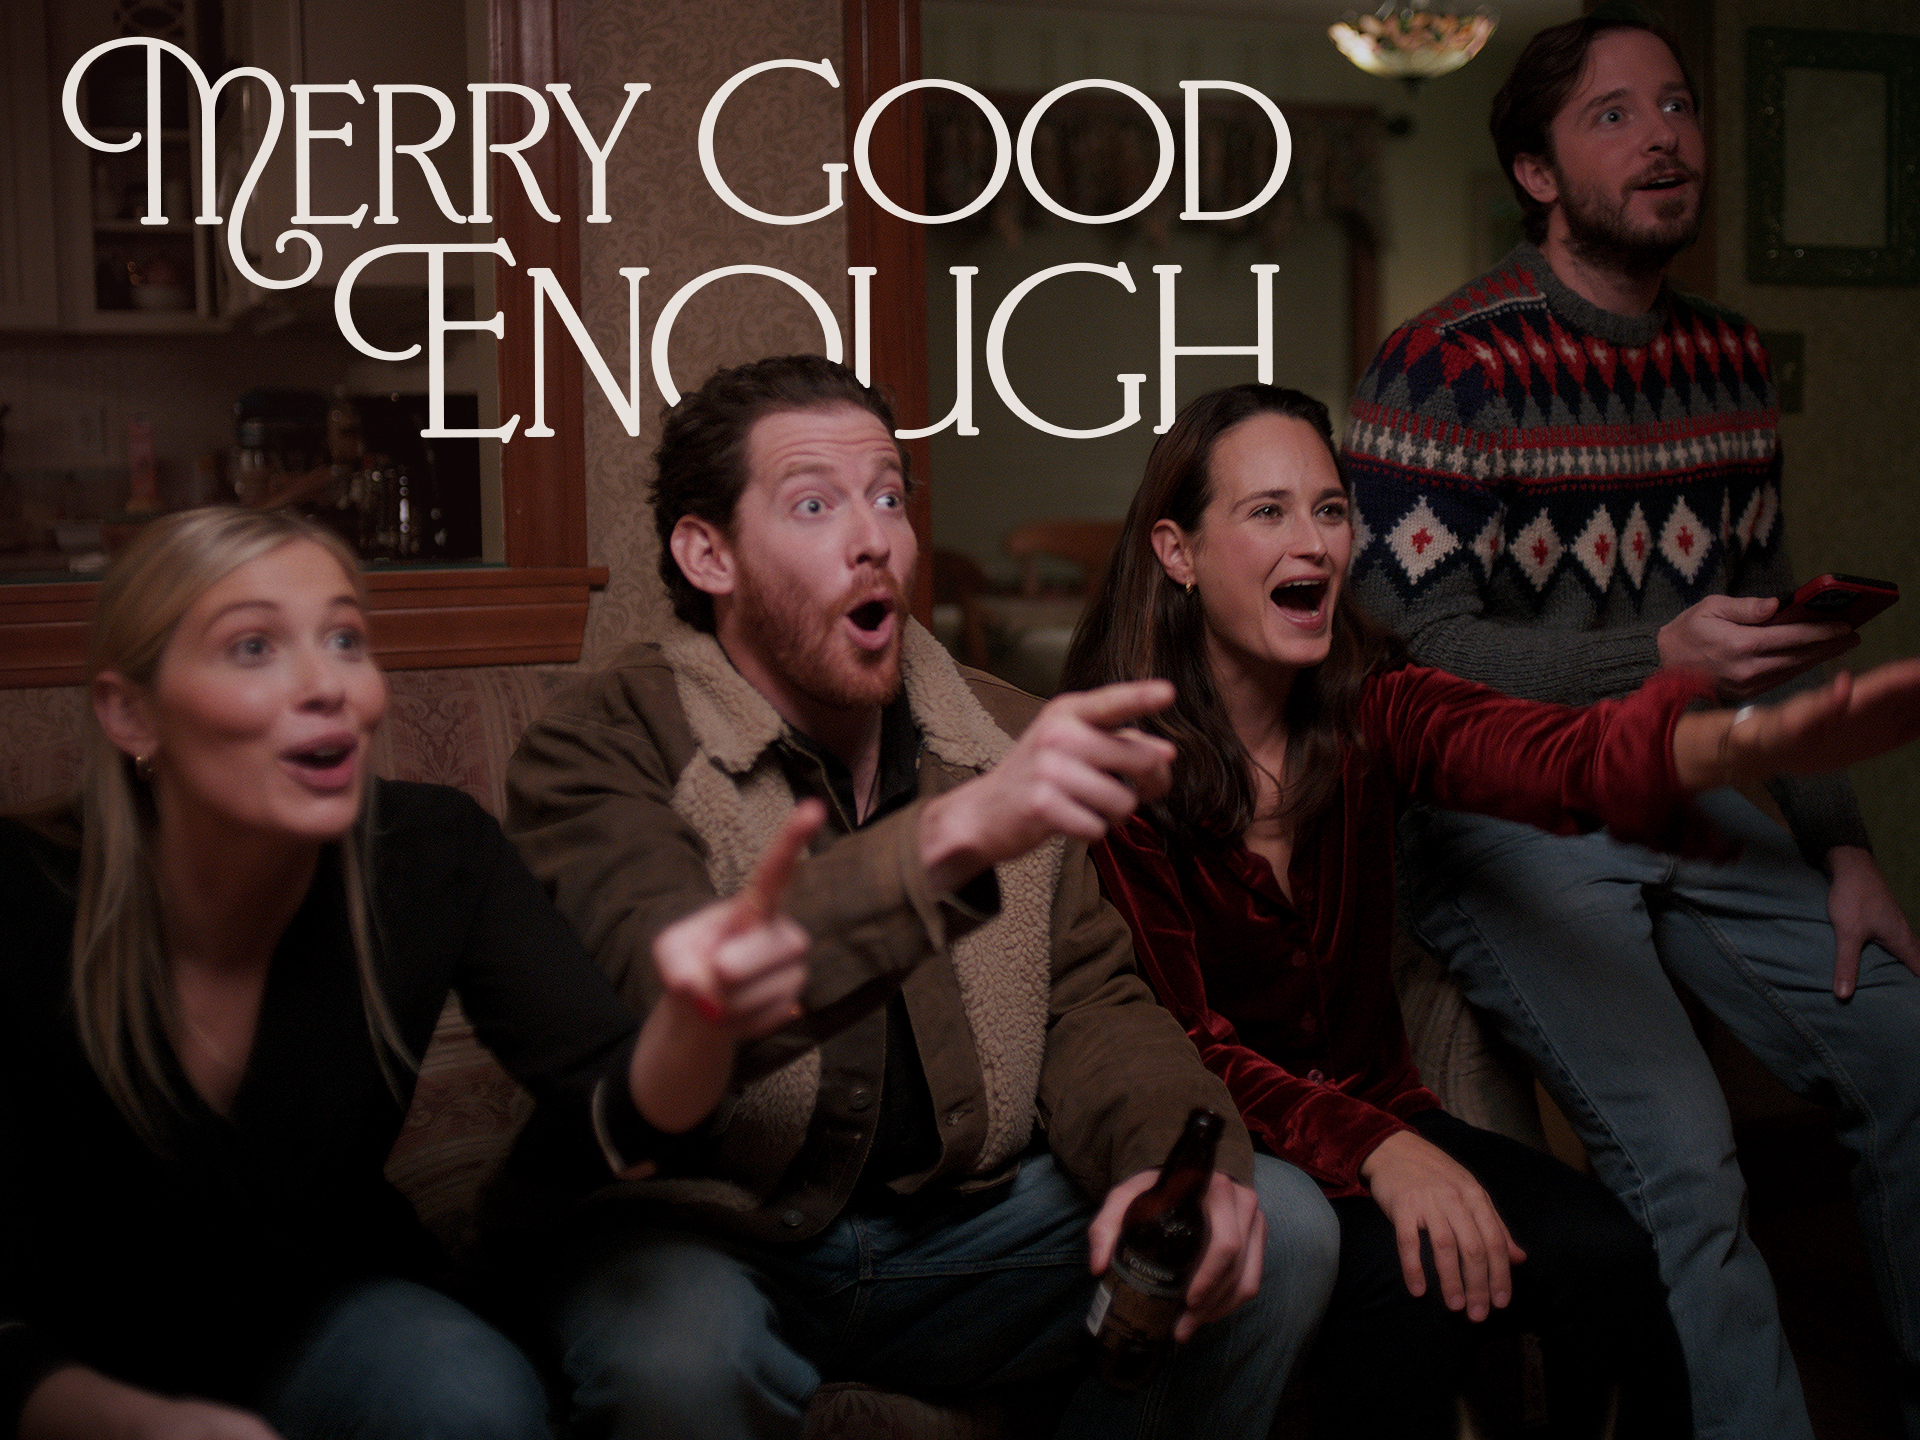 Merry Good Enough | Dan Kennedy, Joel Murray, and Comfort Clinton on Family Drama for the Holidays